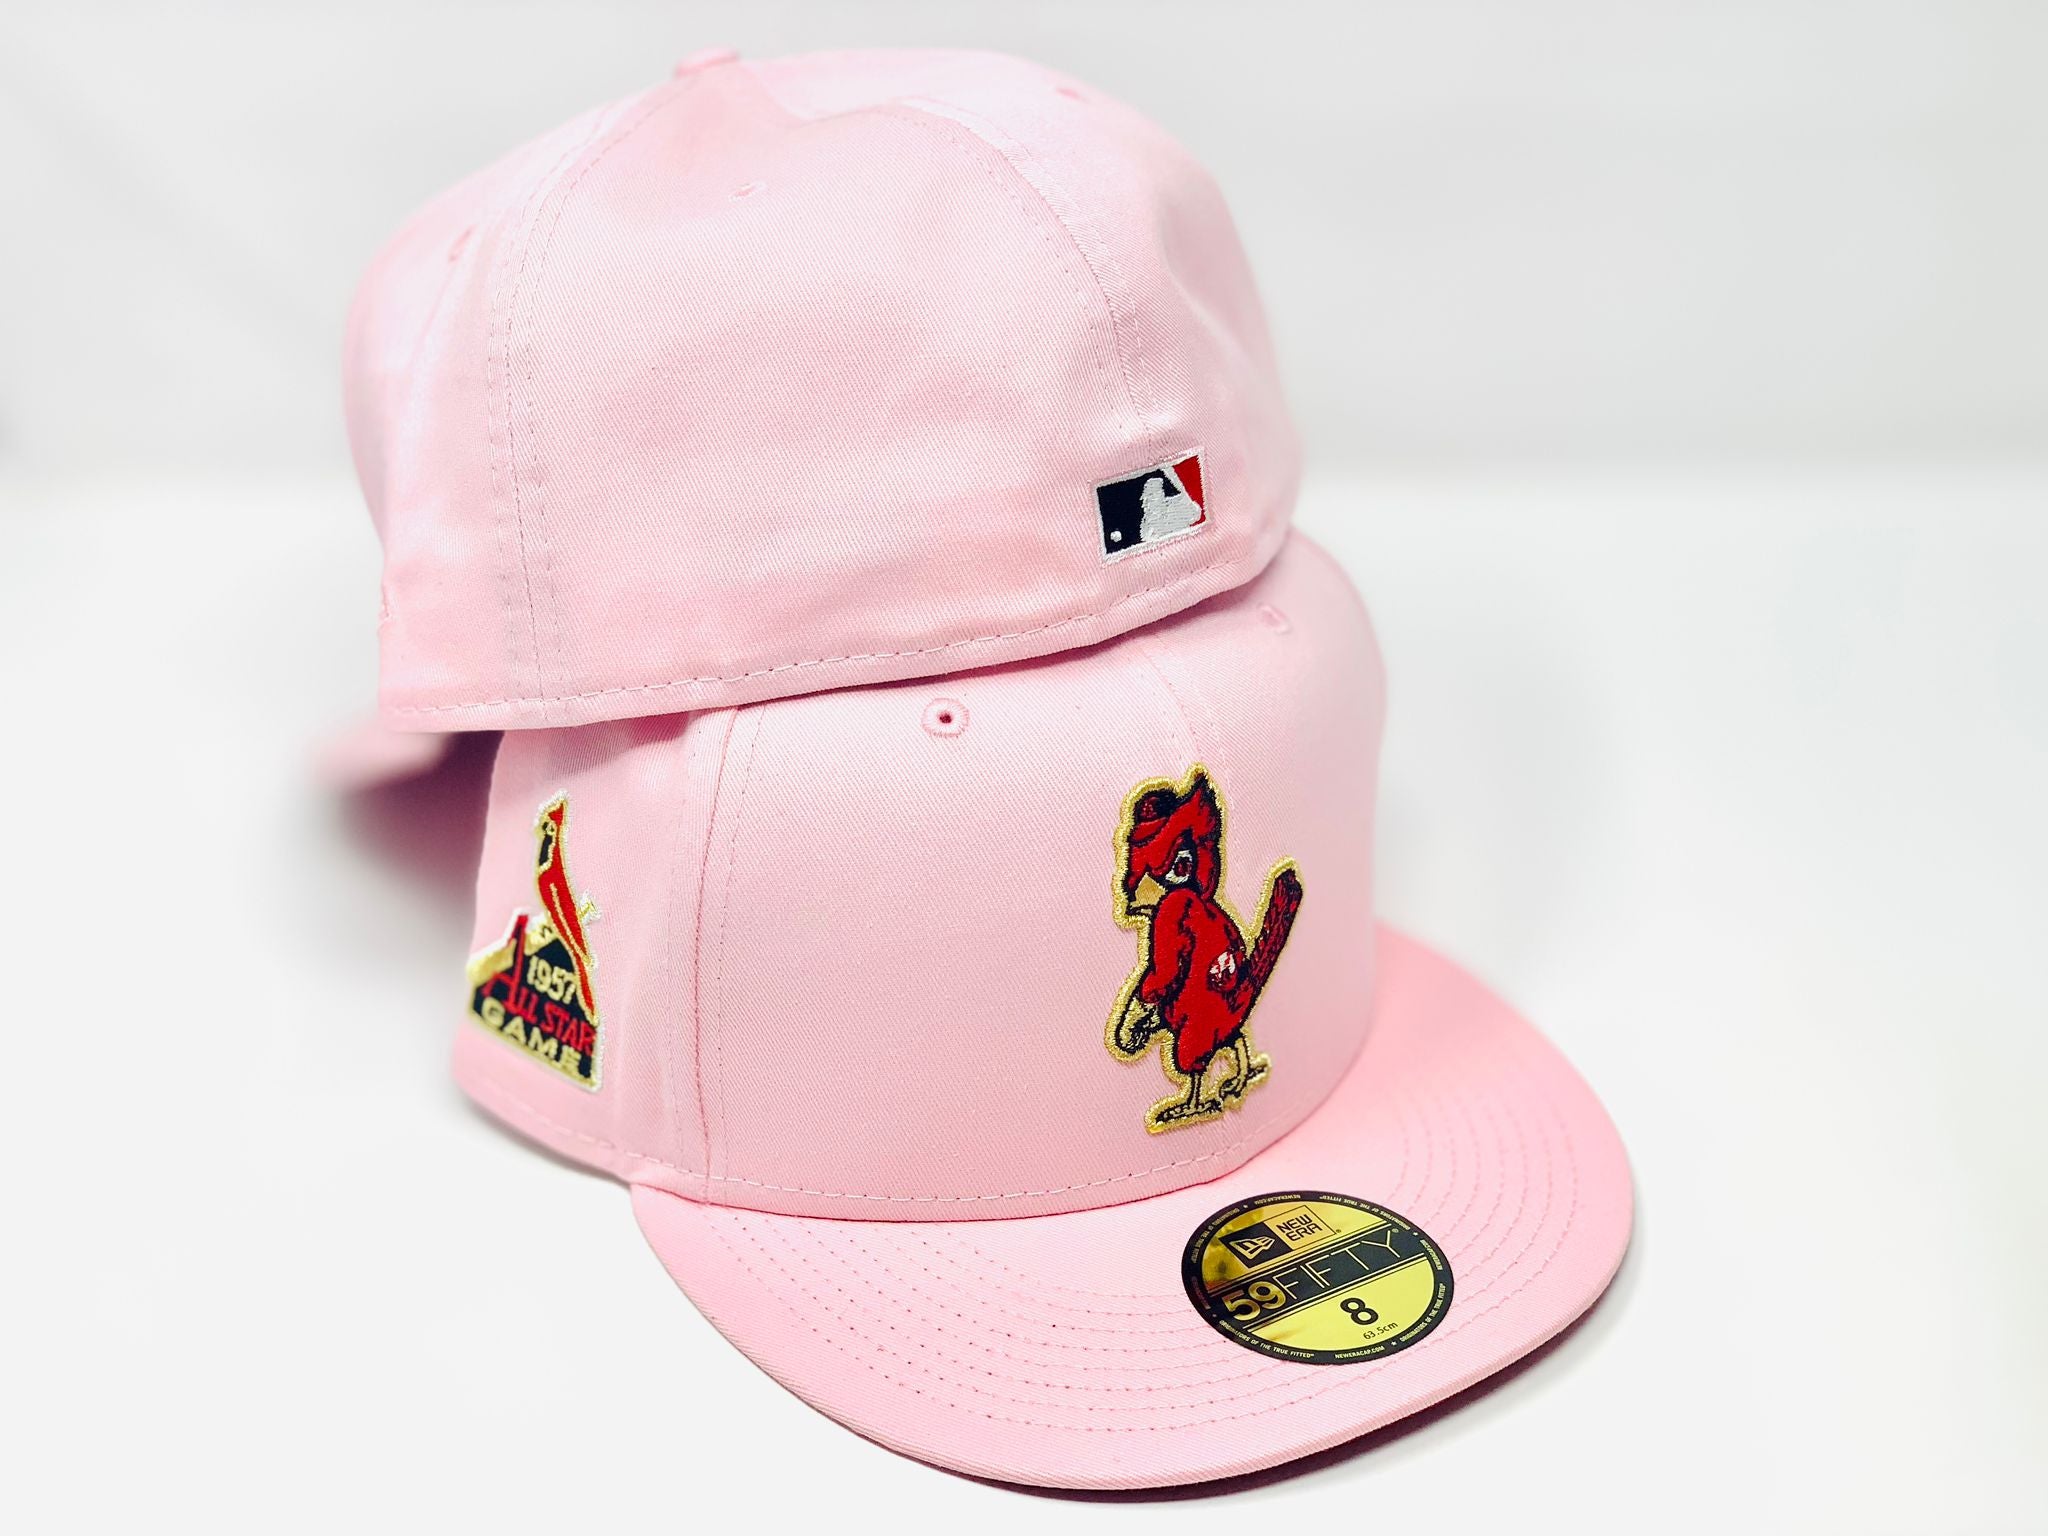 Lids St. Louis Cardinals New Era Flamingo 59FIFTY Fitted Hat - White/Pink